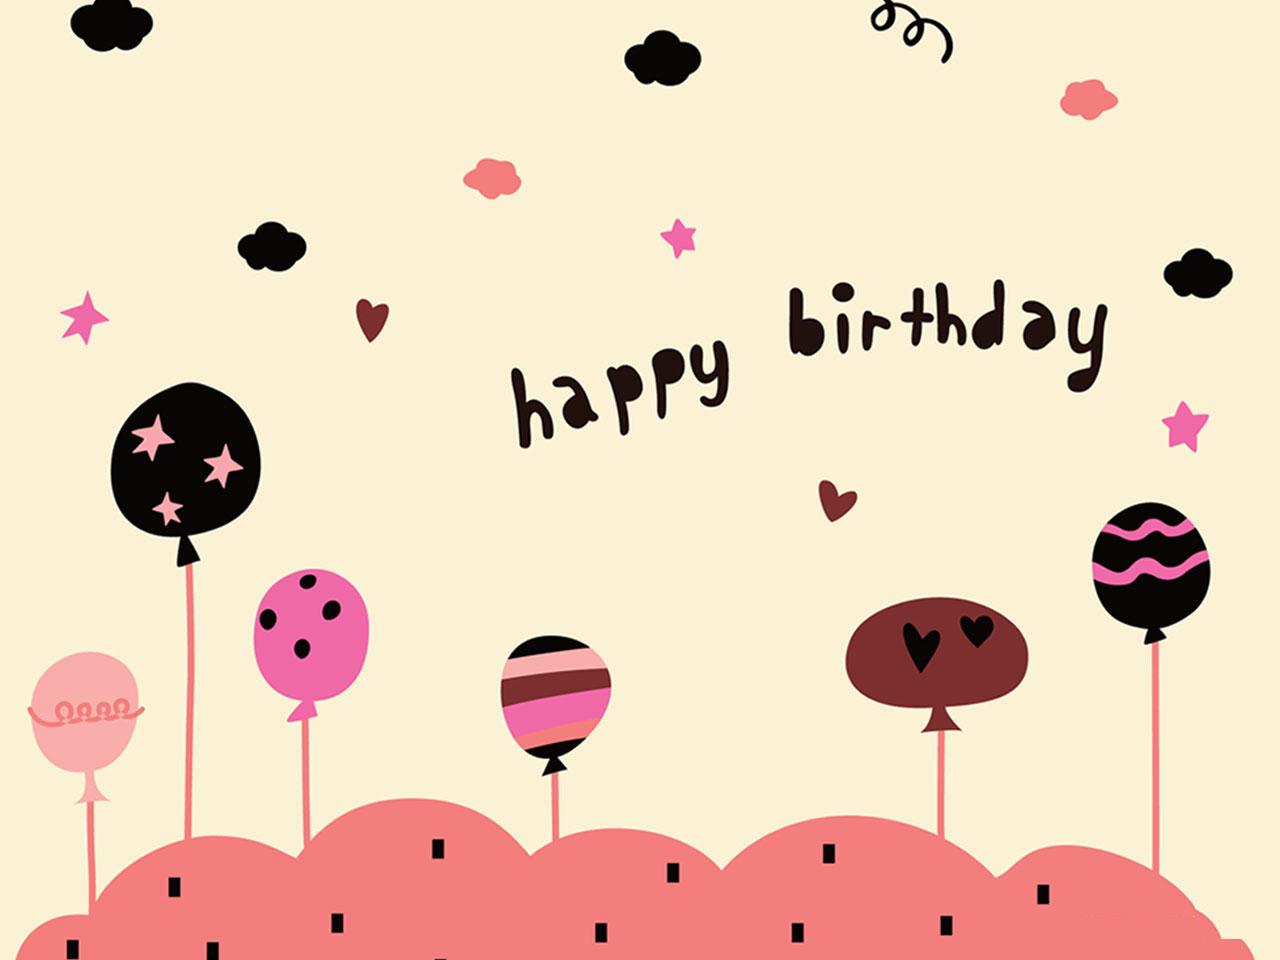 Wonderful Birthday Poems to Send to Your Father on His Birthday 3